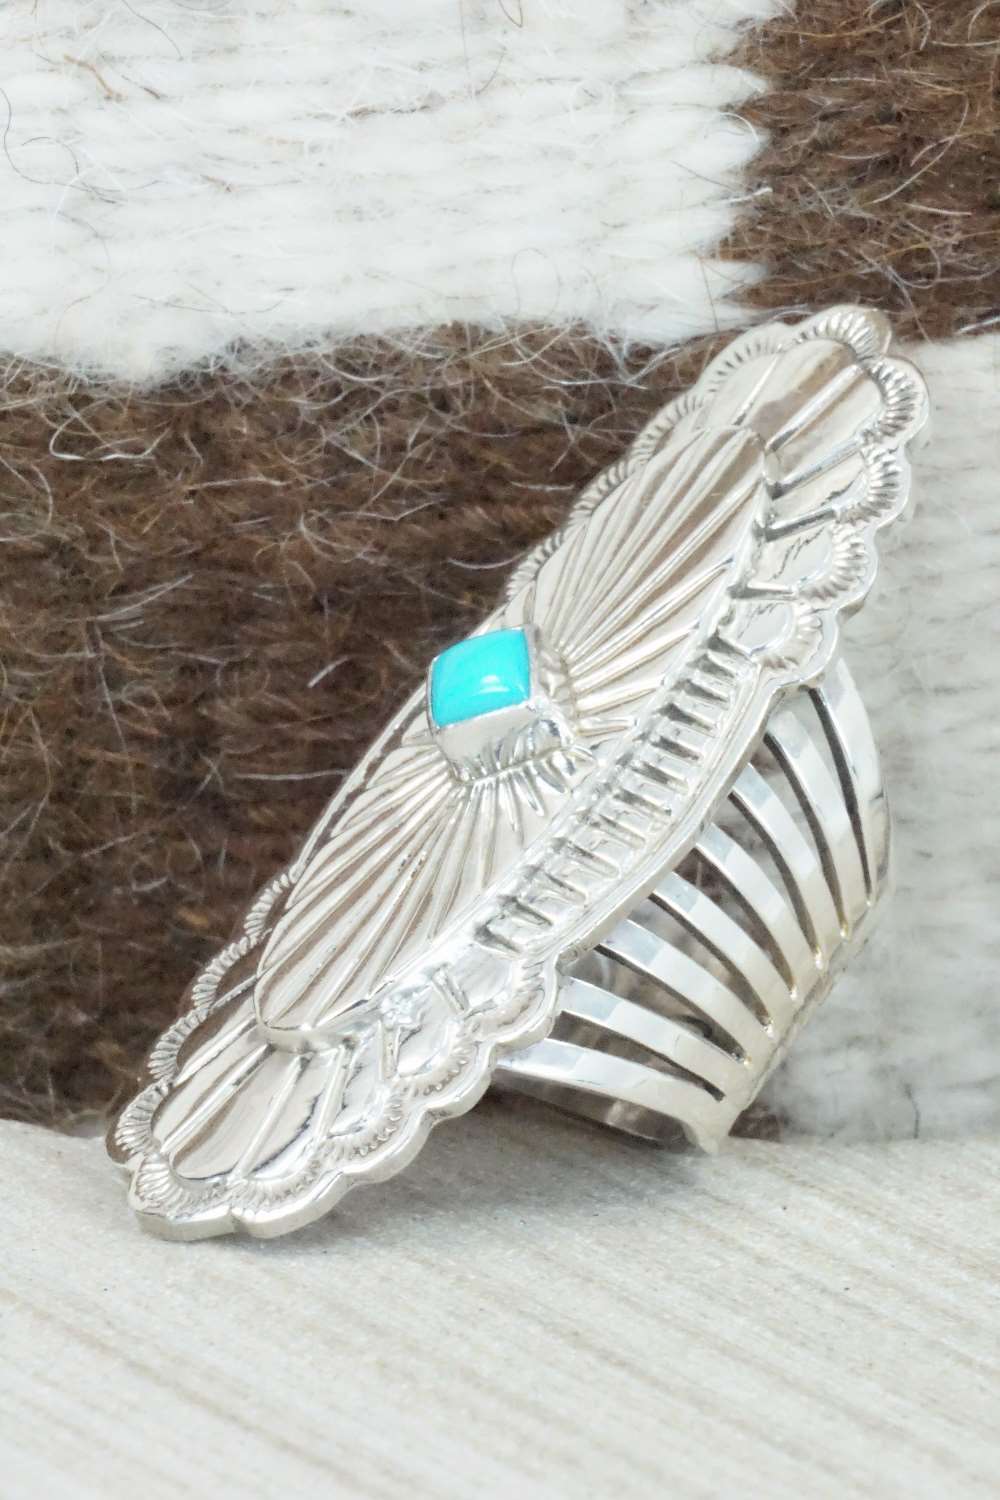 Turquoise and Sterling Silver Ring - Mike Smith - Size 6.5